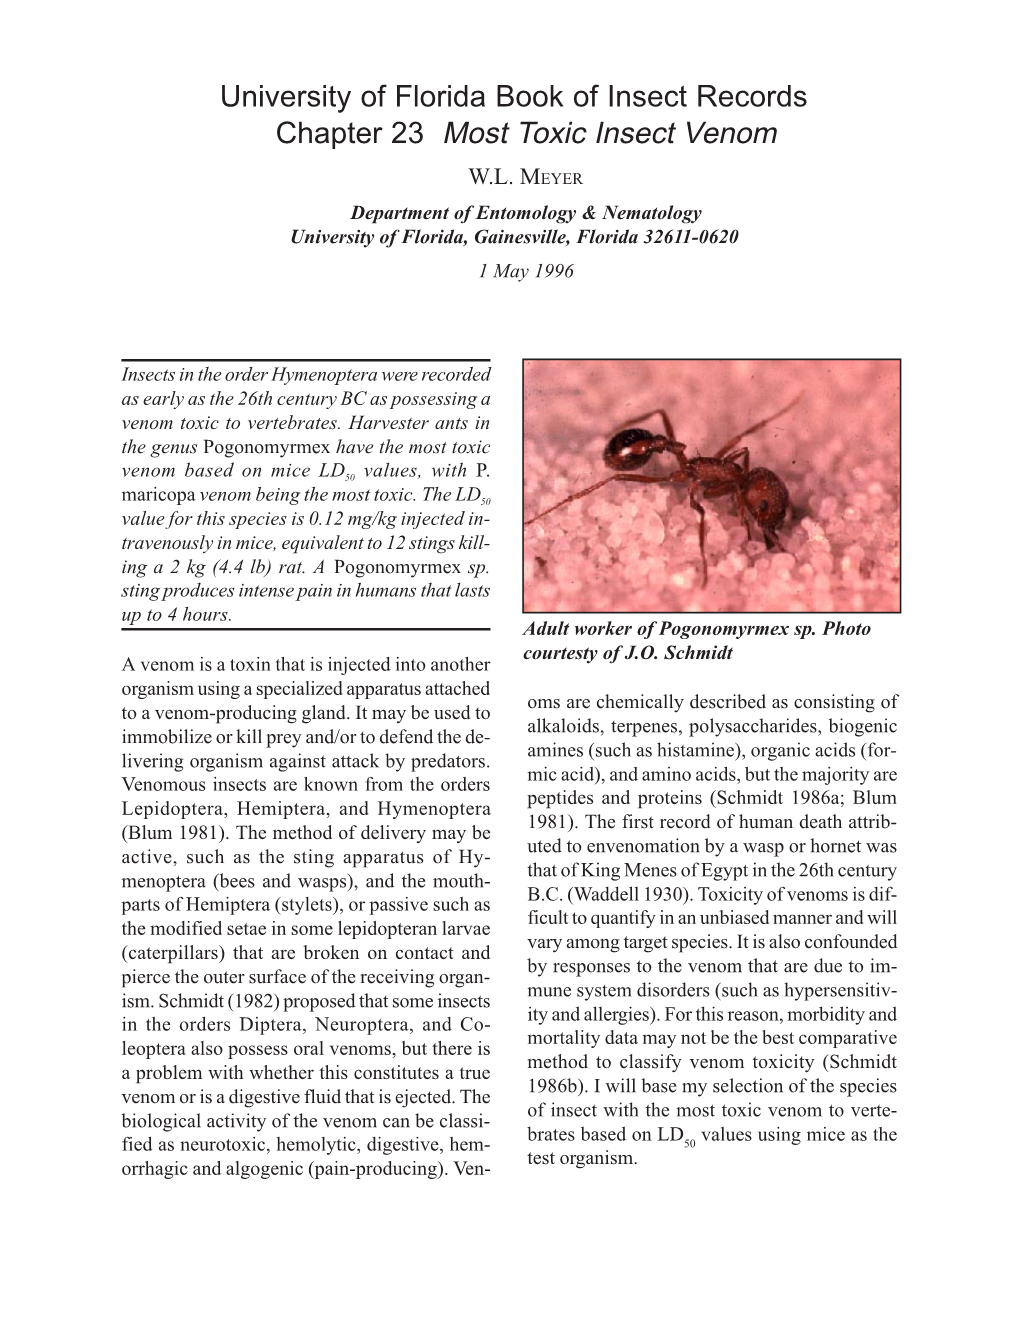 University of Florida Book of Insect Records Chapter 23 Most Toxic